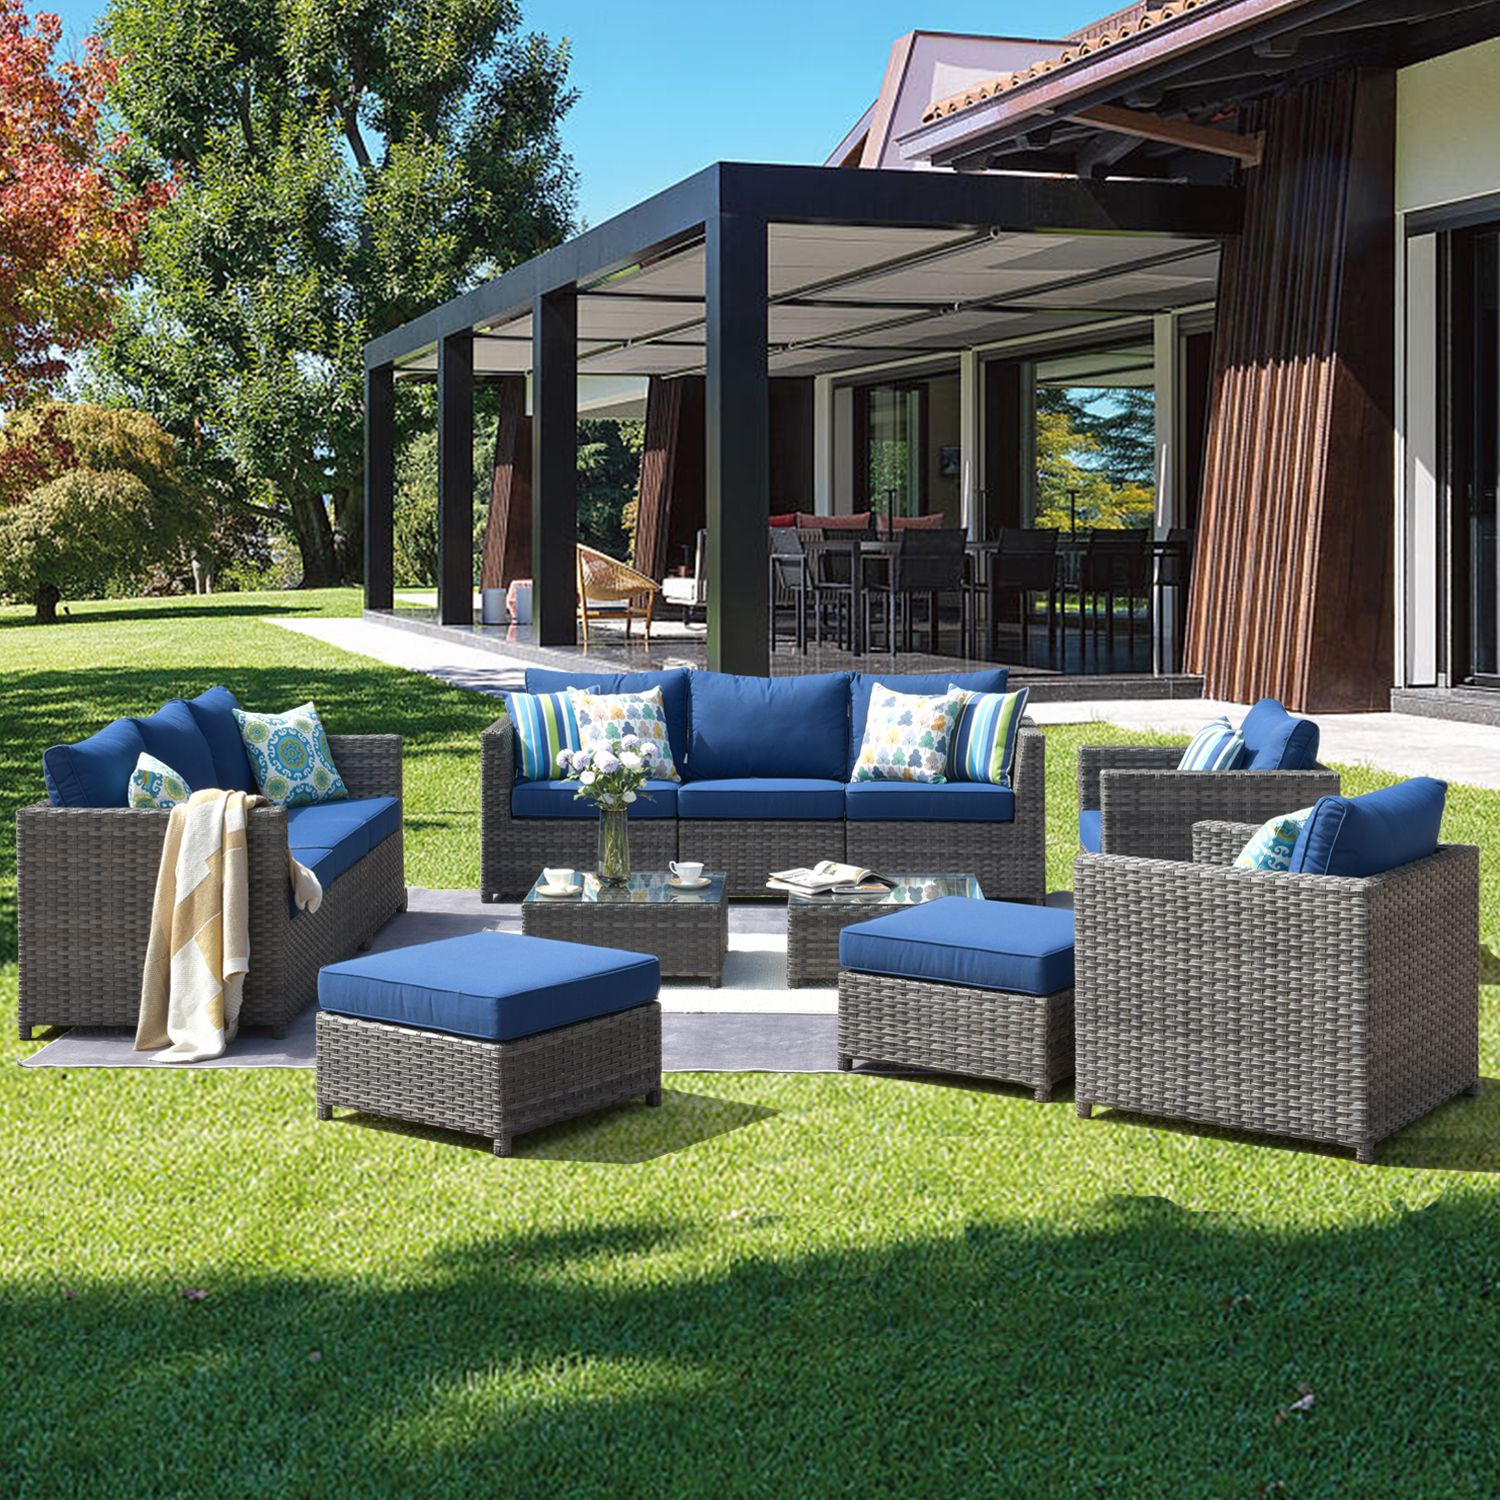 Ovios Patio Furniture Set, Big Size Outdoor Furniture Sets,Pe Rattan In Navy Outdoor Seating Sectional Patio Sets (View 6 of 15)